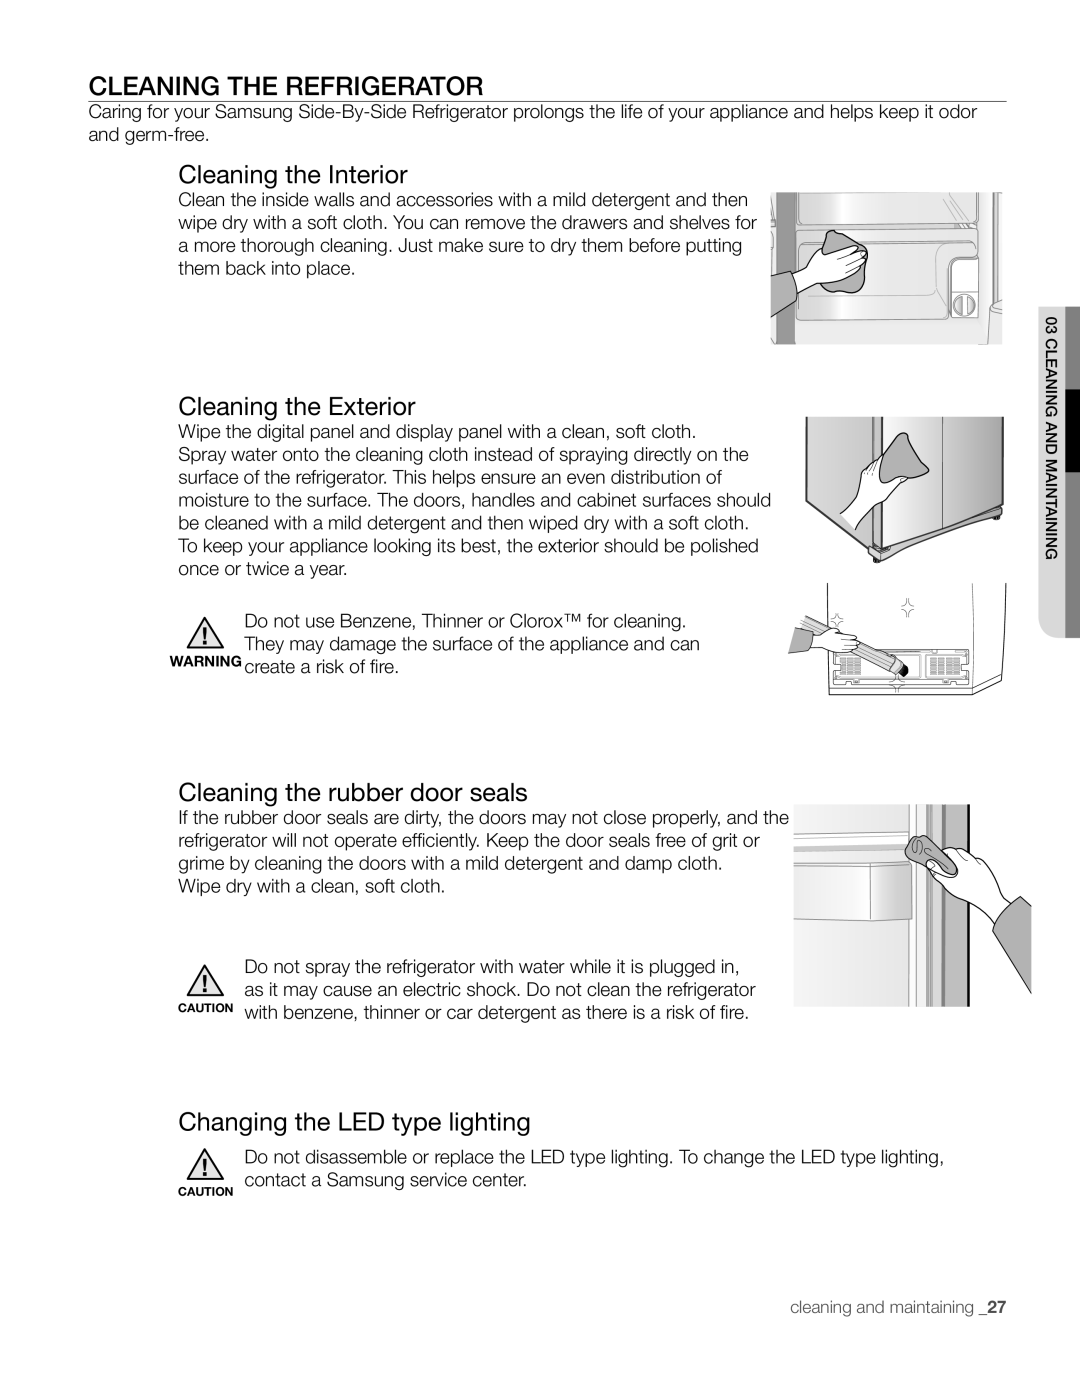 Samsung RS261M** Cleaning The Refrigerator, Cleaning the Interior, Cleaning the Exterior, Cleaning the rubber door seals 